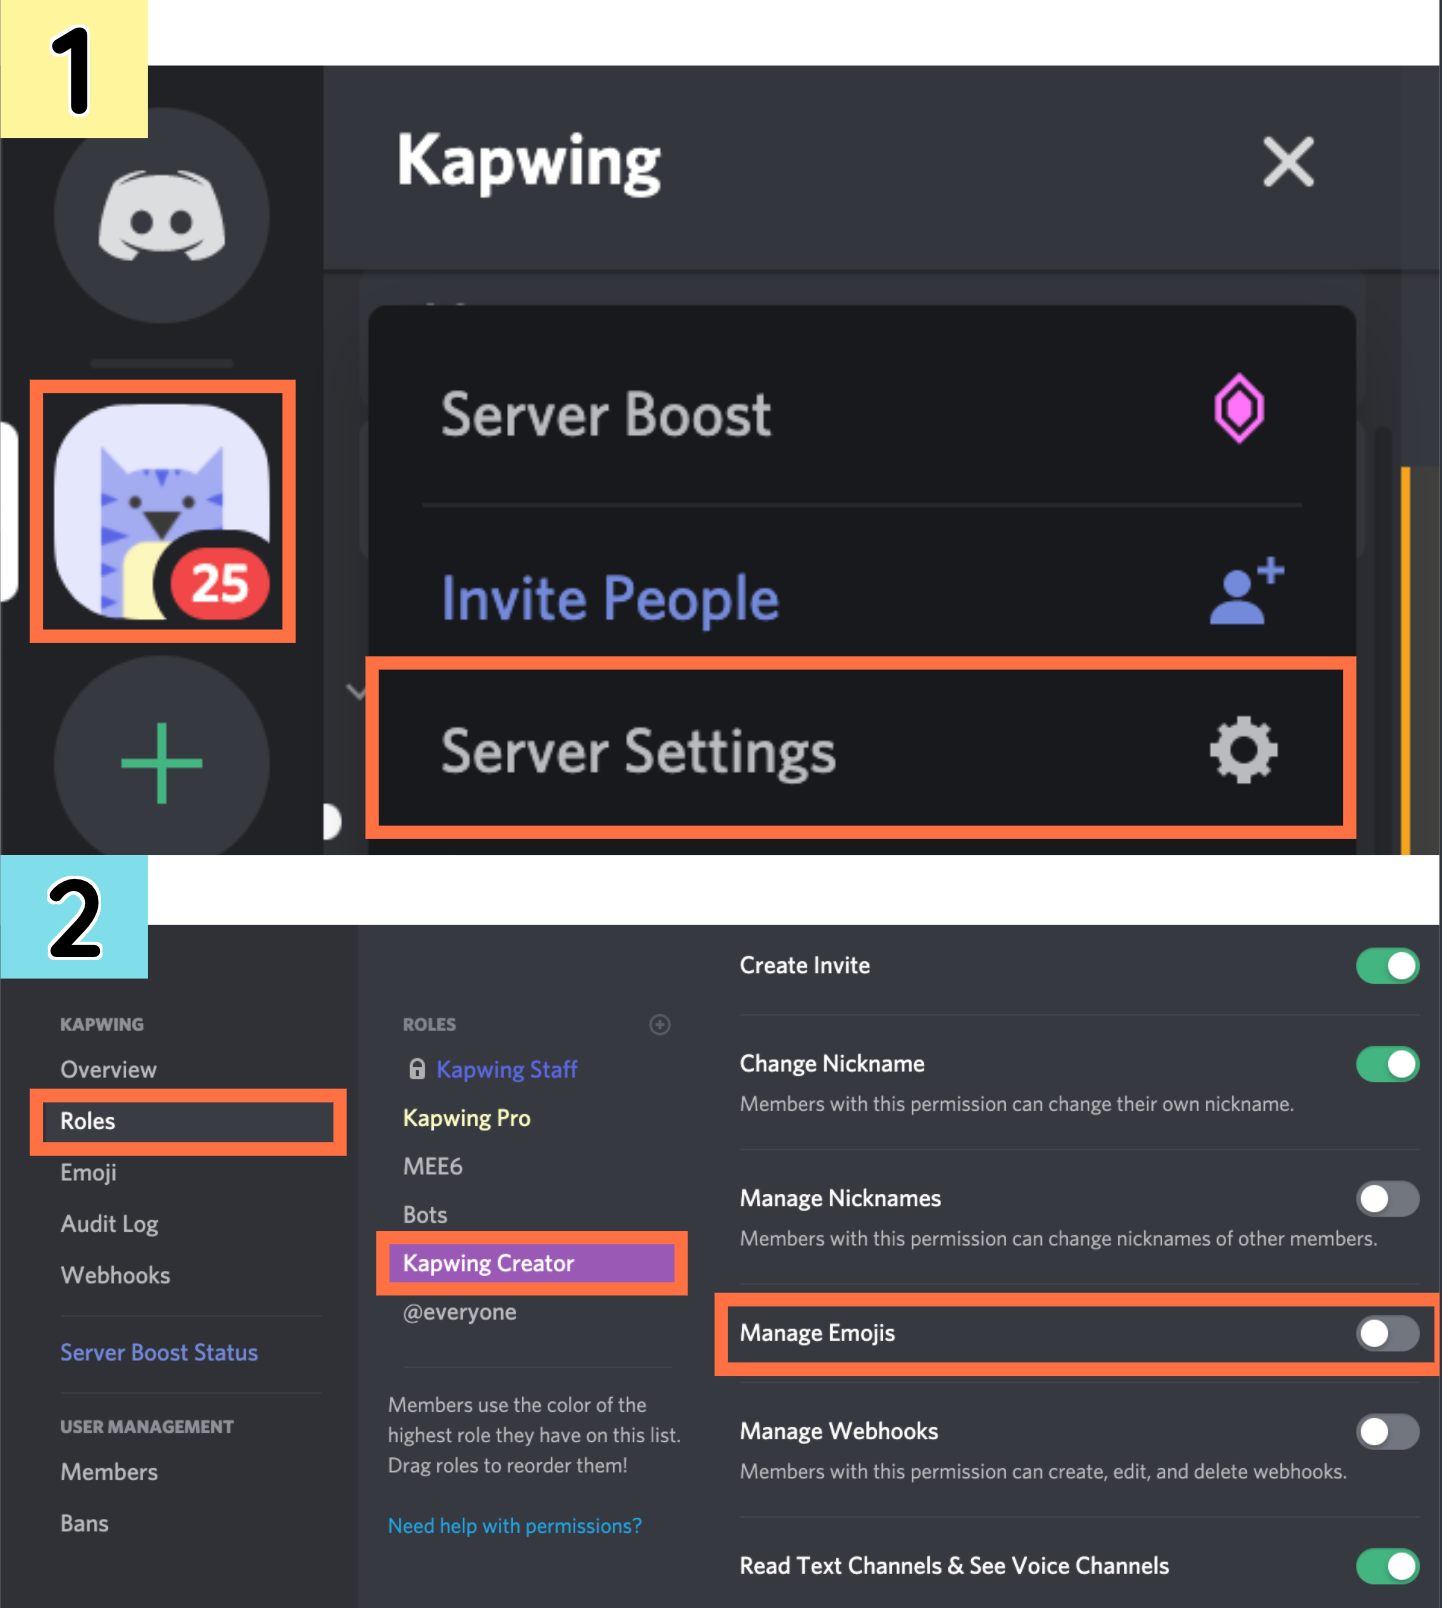 how to download emotes from a discord server